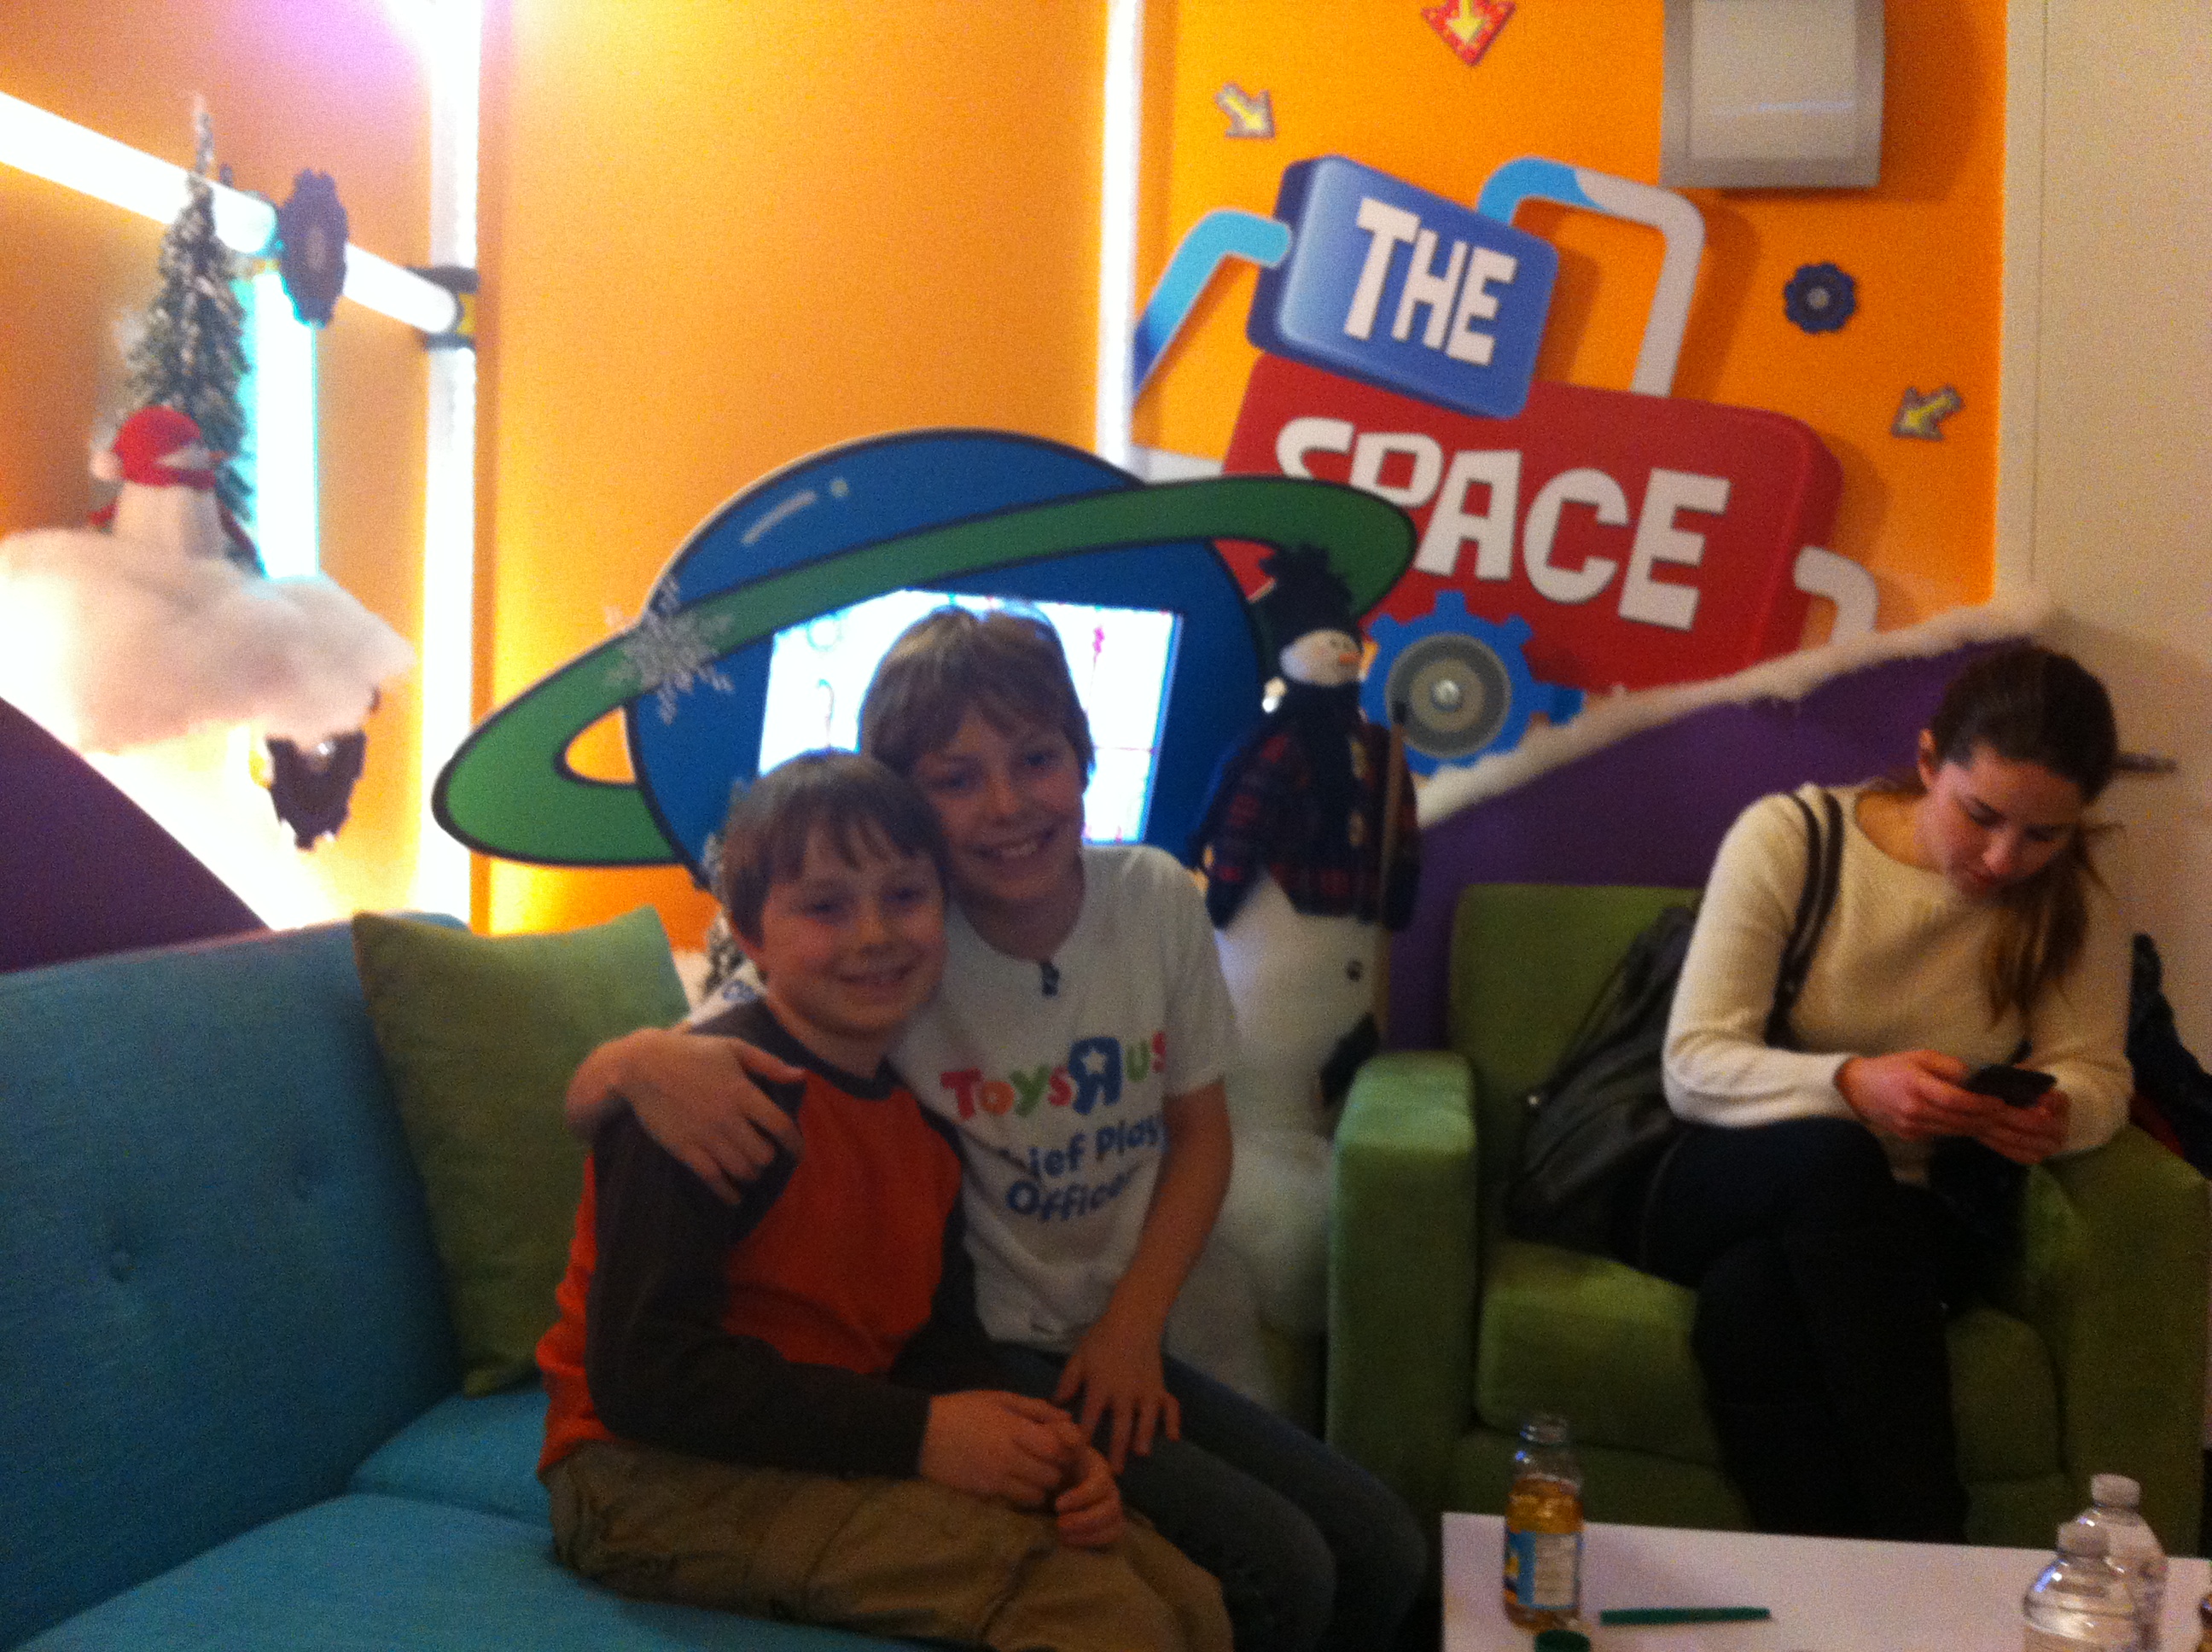 On TVO's The Space - as Chief Play Officer (National Spokesperson) for Toys R Us Canada